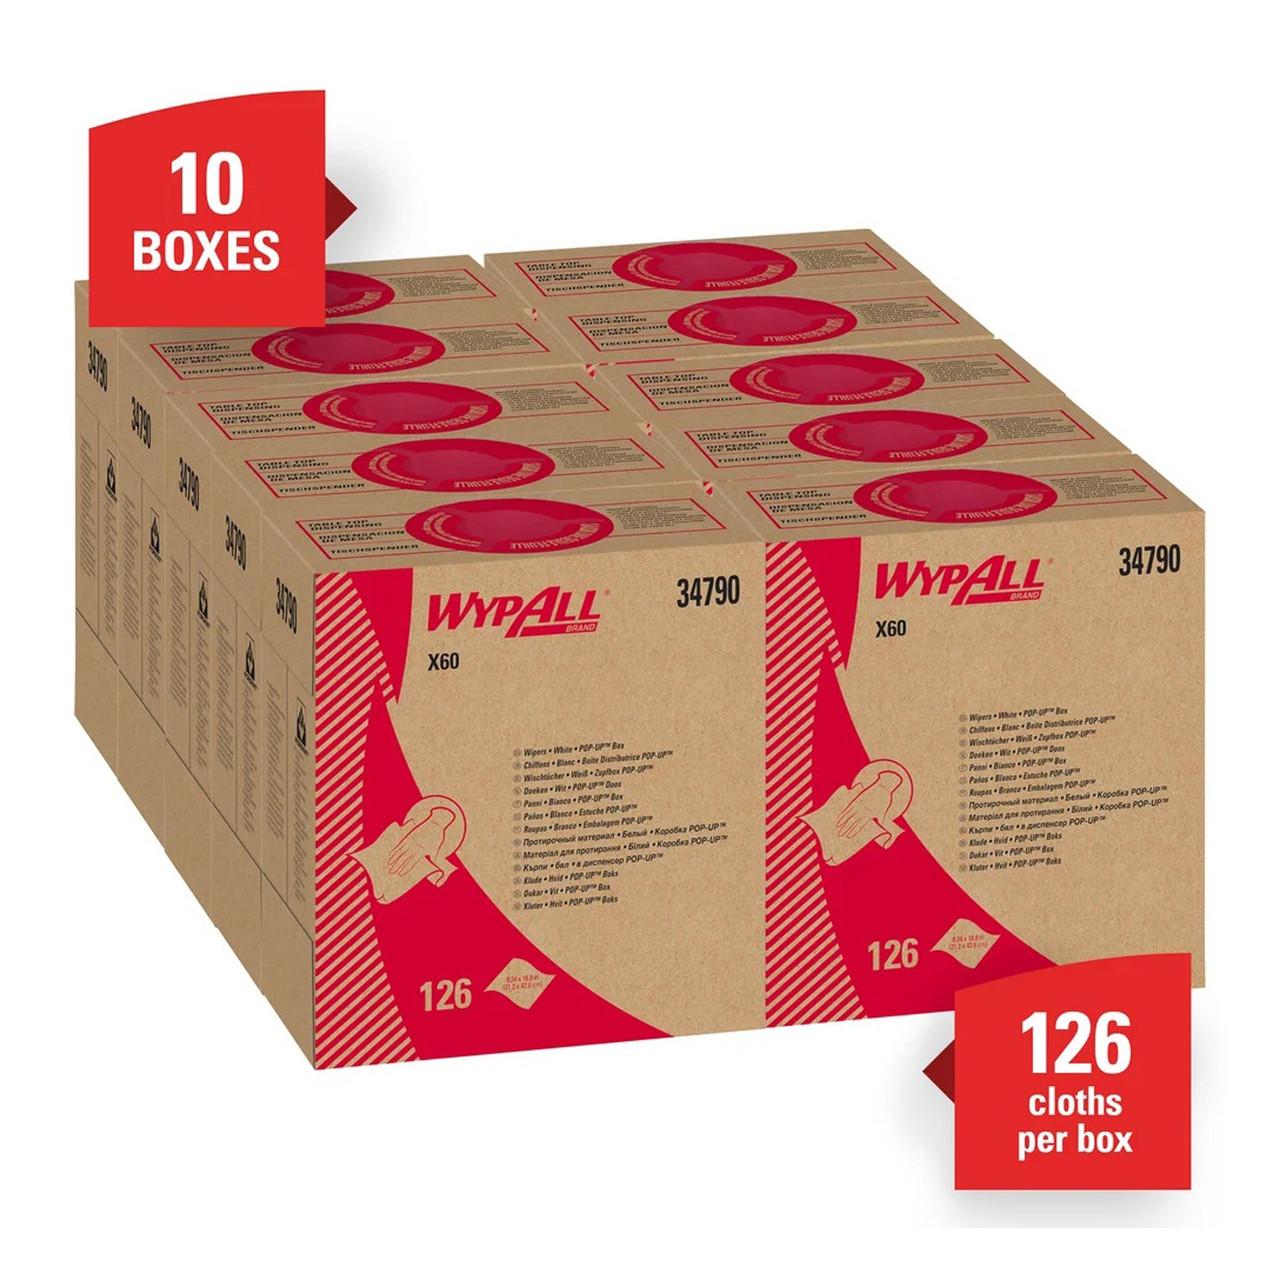 WypAll X60 Reusable Task Wipe 9-1/10 x 16-4/5" 34790 1 Pack 126 Wipes 